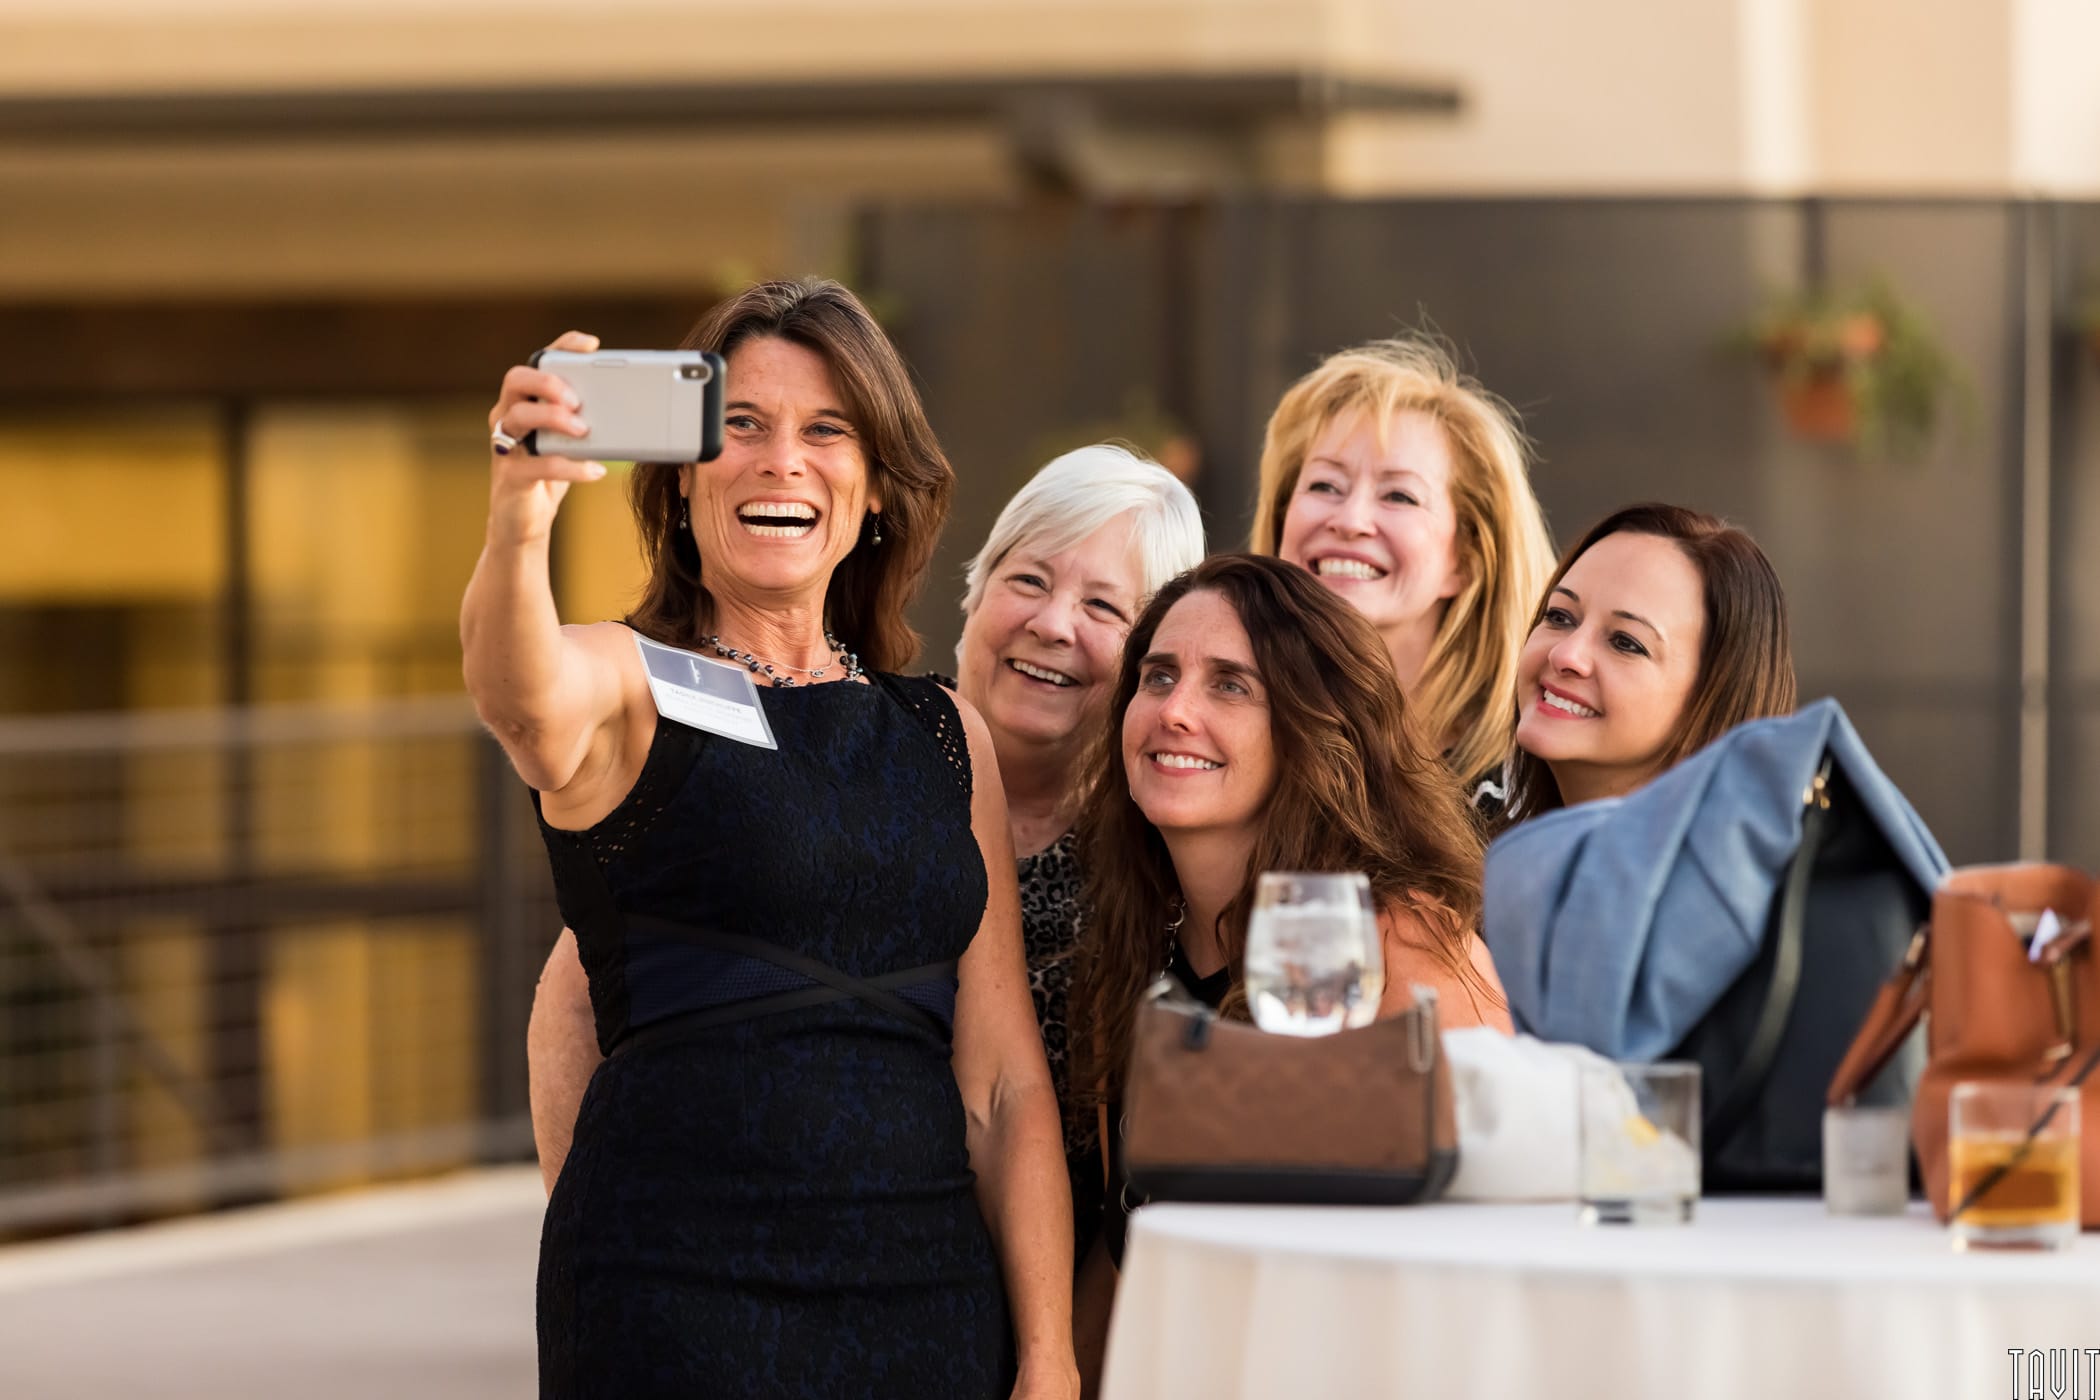 Group of people taking a picture at business event